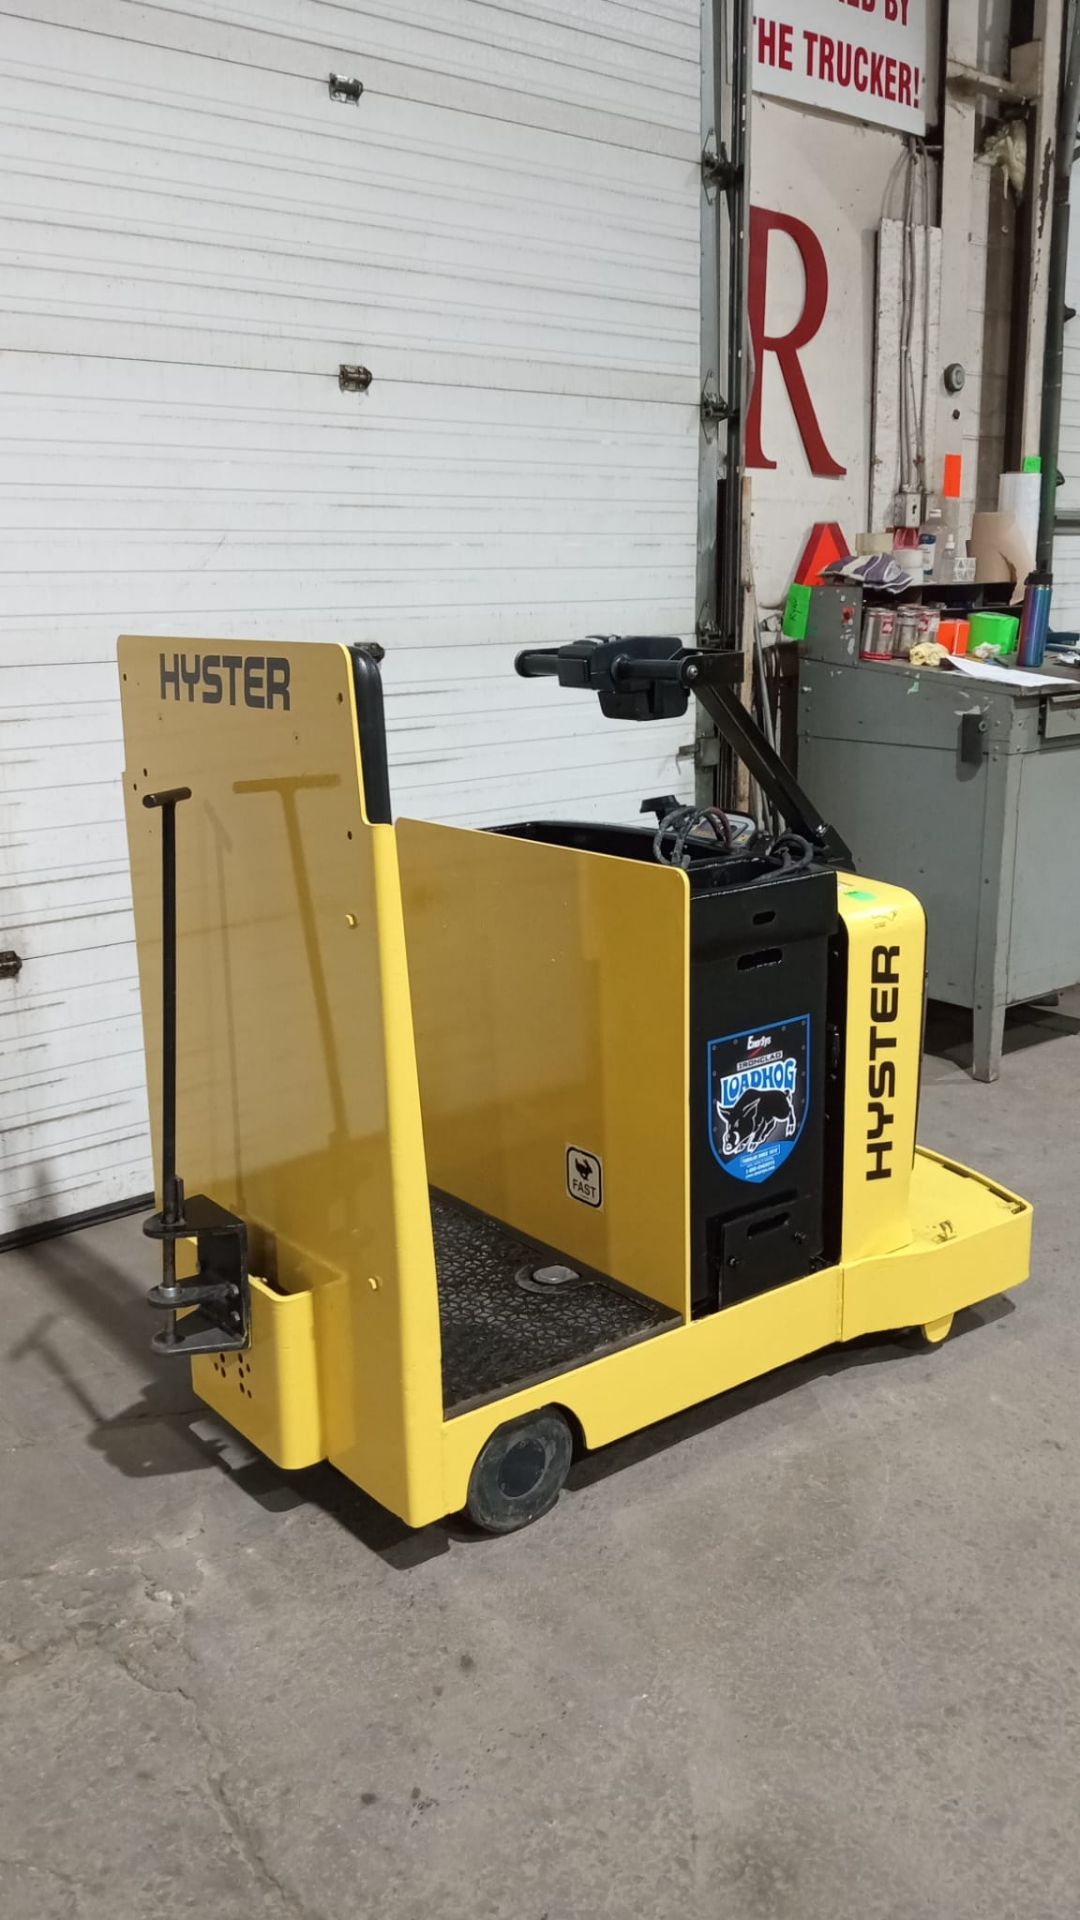 2018 Hyster Ride On Tow Tractor - Tugger / Personal Carrier with 24V Battery Electric Unit - Image 2 of 5